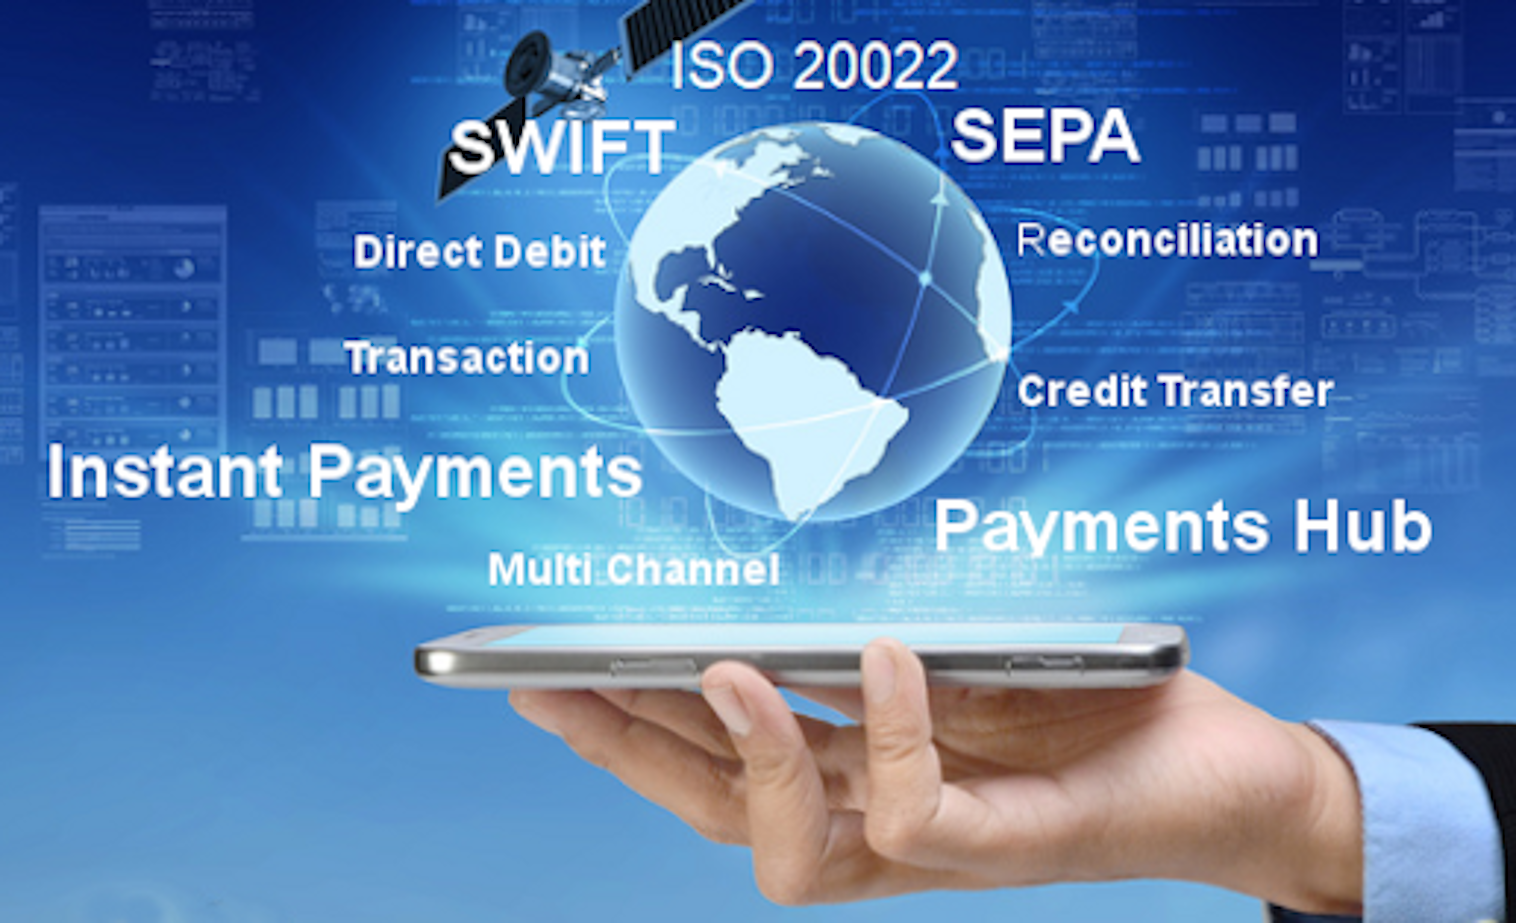 payments hub, ISO20022, real time payments, SWIFT, SEPA, xml, instant payments, instant payments